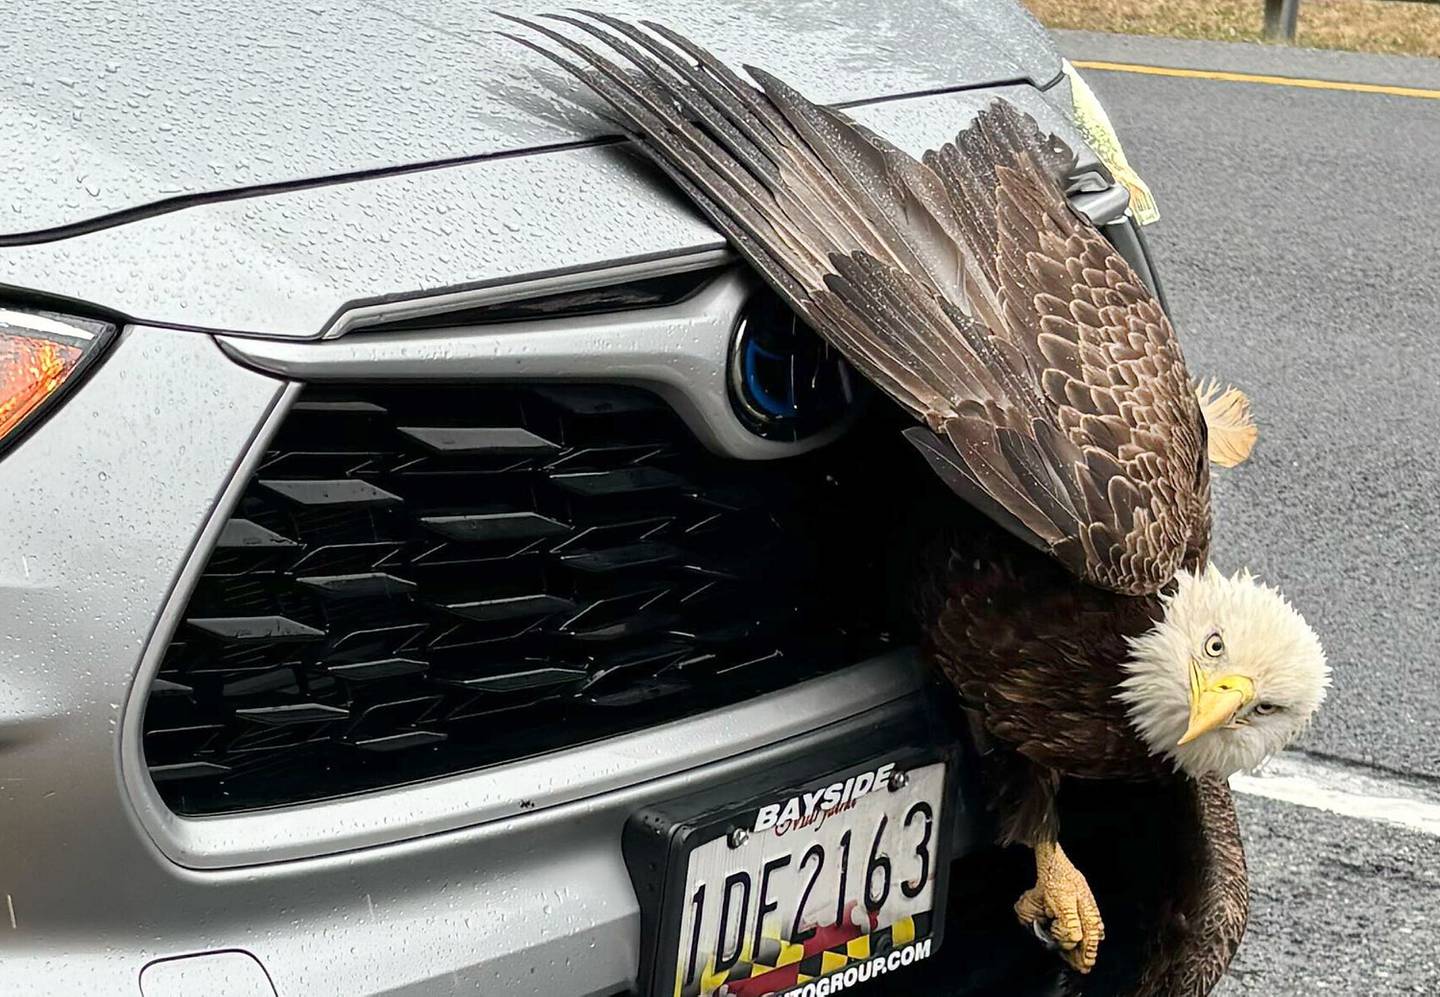 Rebecca Atkins was driving through Route 4, a state highway she usually takes to drive to work, when an eagle collided with her car. The eagle was stuck in the grill for more than an hour.